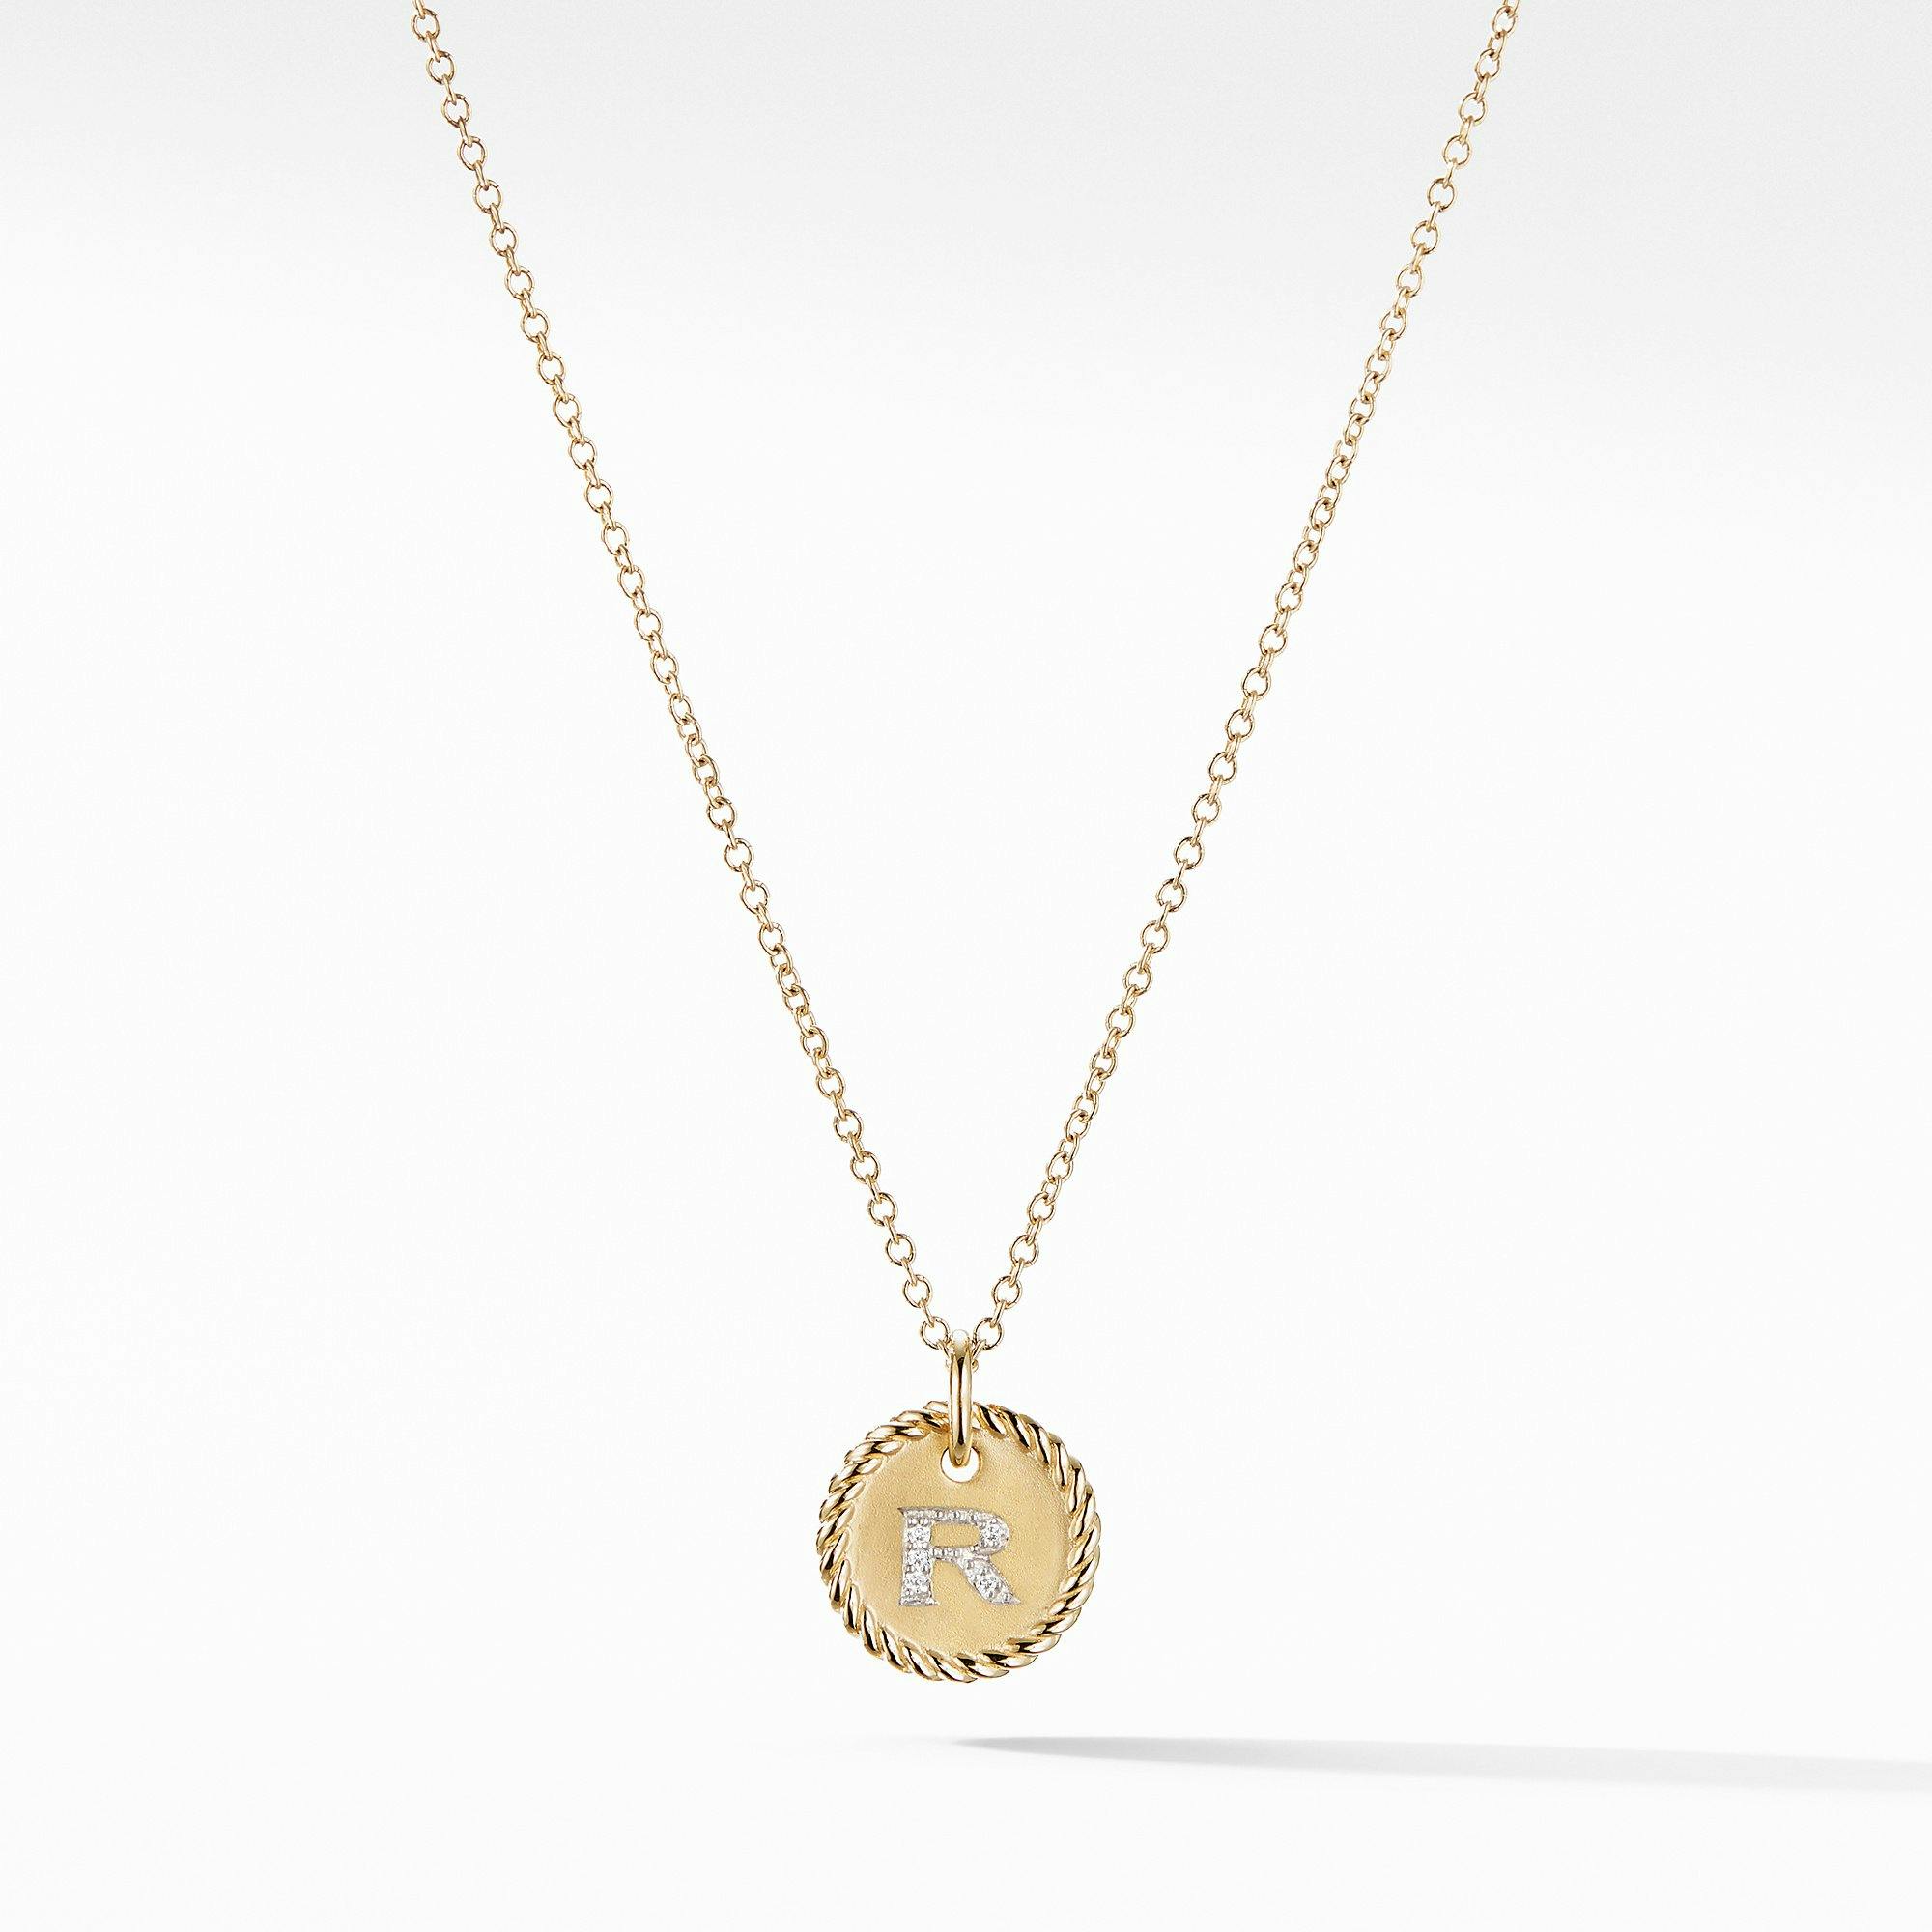 David Yurman "R" initial Charm Necklace with Diamonds in Yellow Gold